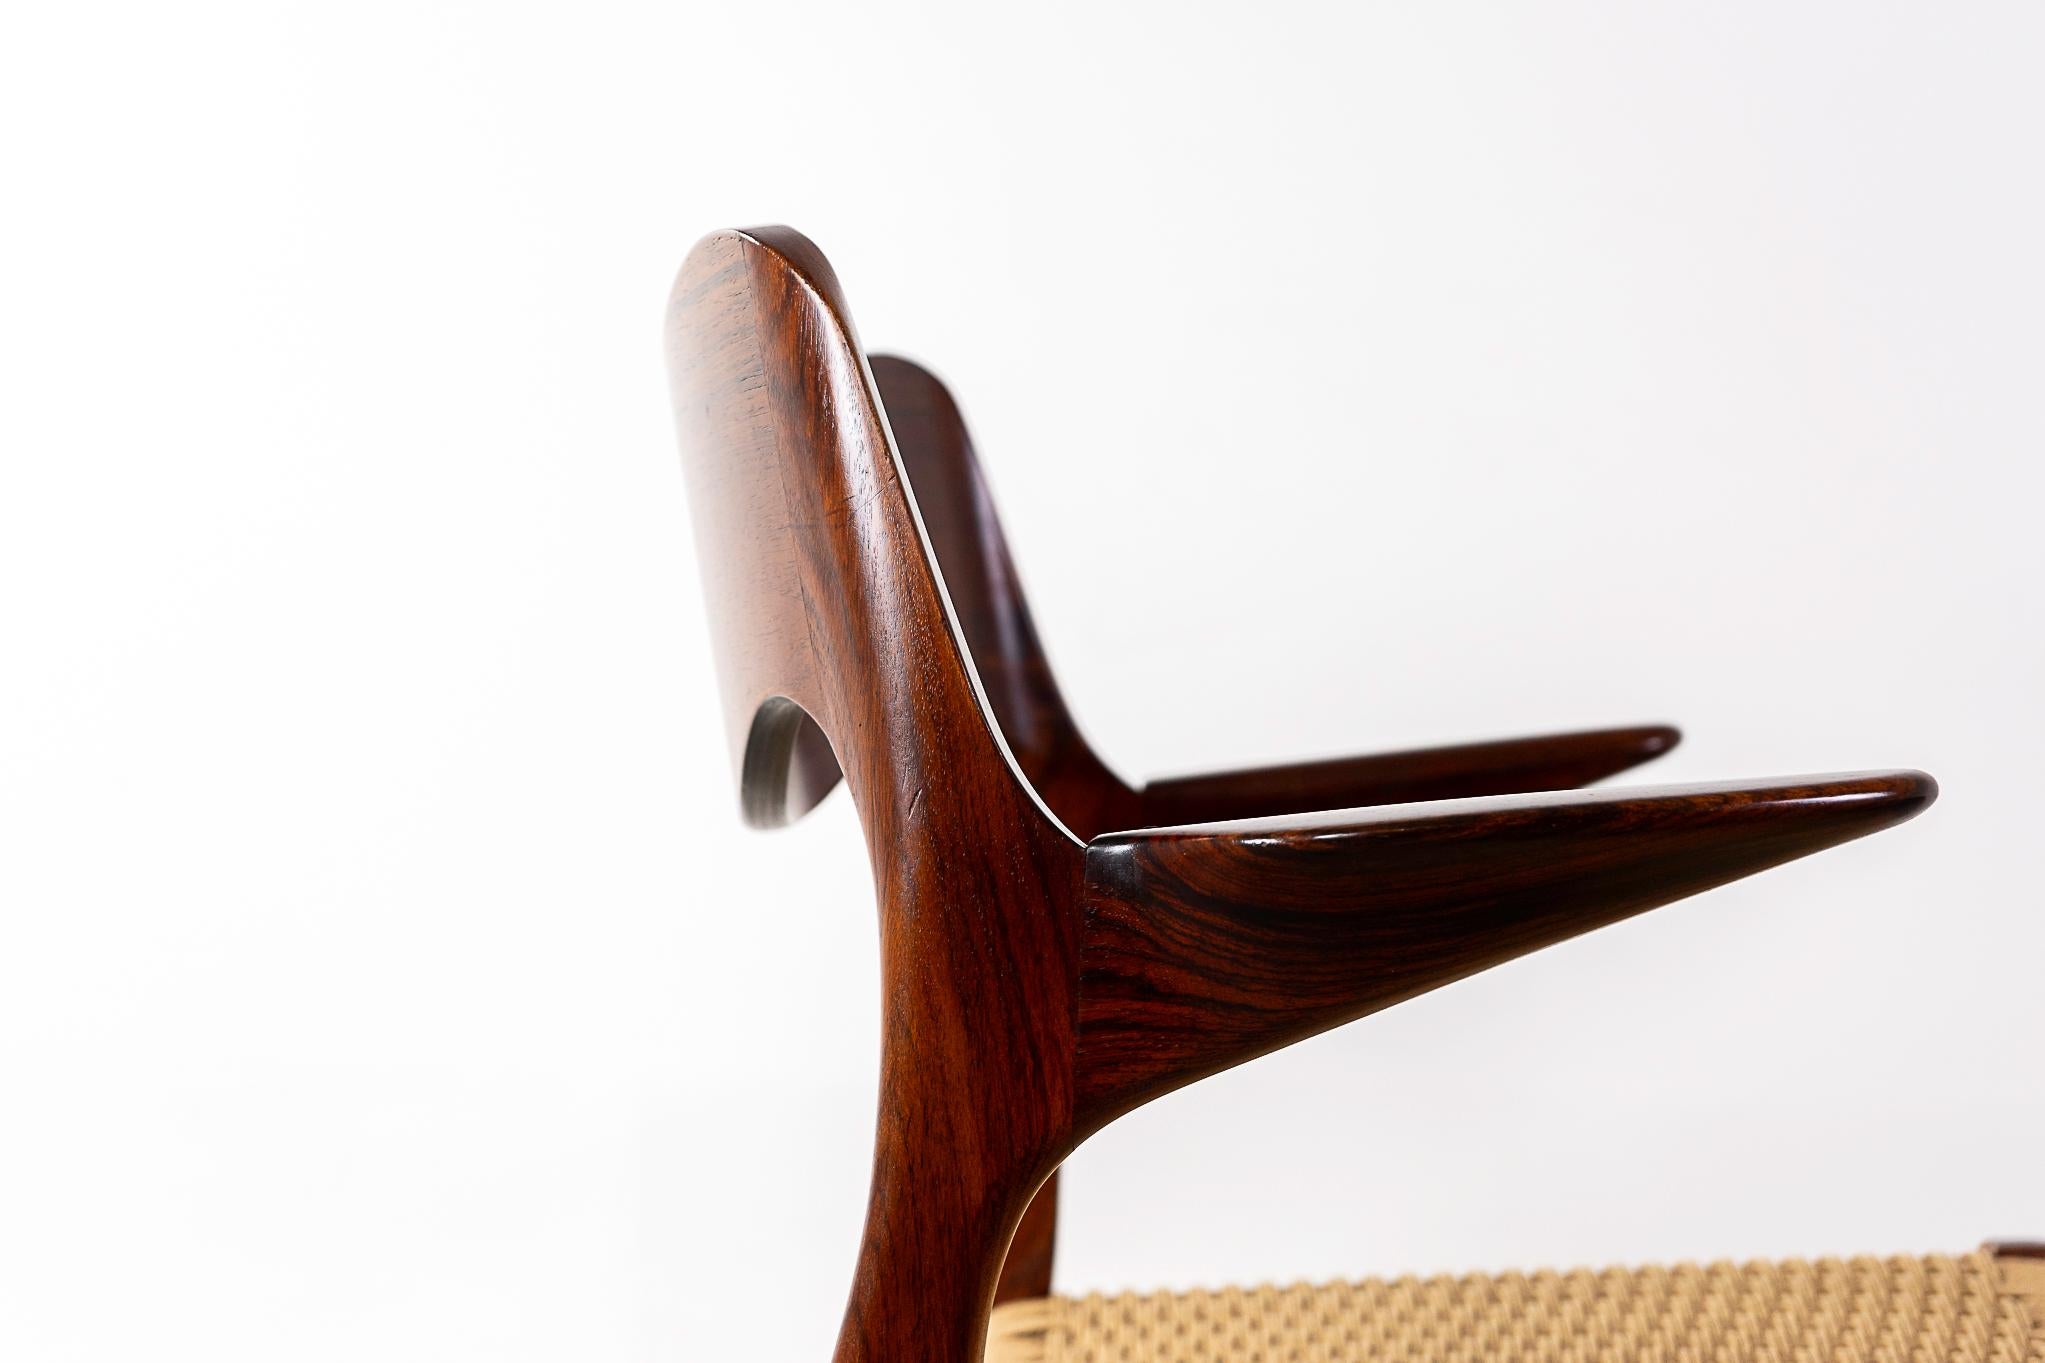 Papercord Rosewood Model 55 Armchair by Niels Otto Moller